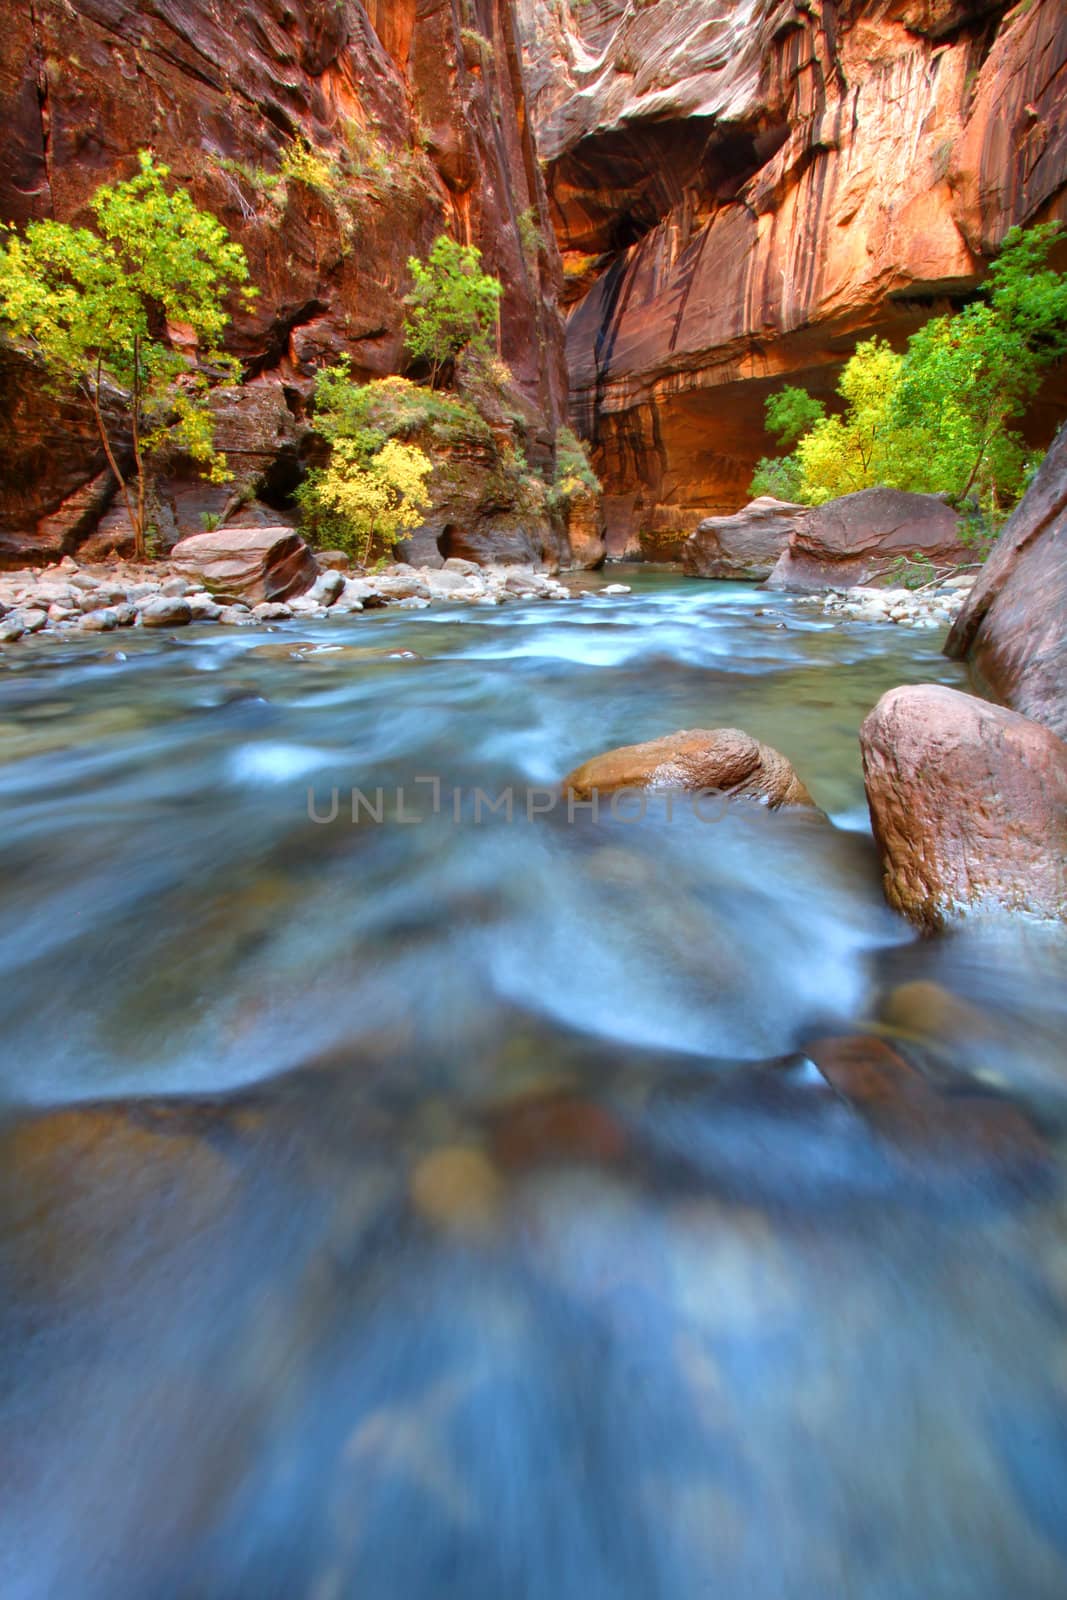 Shallow rapids of the Virgin River Narrows in Zion National Park - Utah.